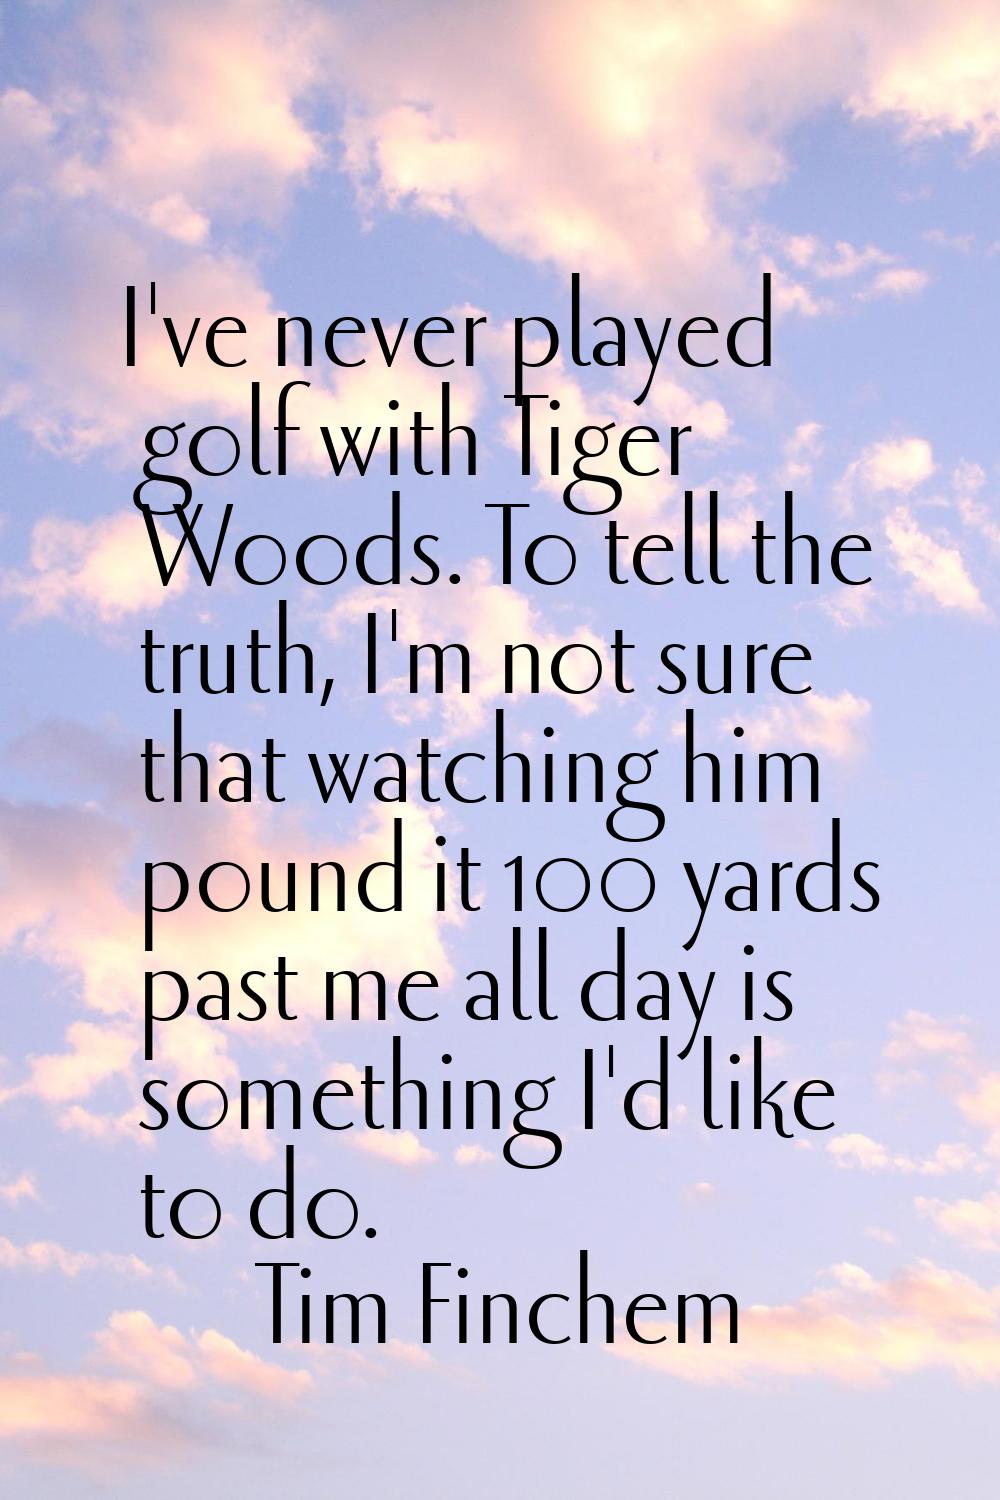 I've never played golf with Tiger Woods. To tell the truth, I'm not sure that watching him pound it